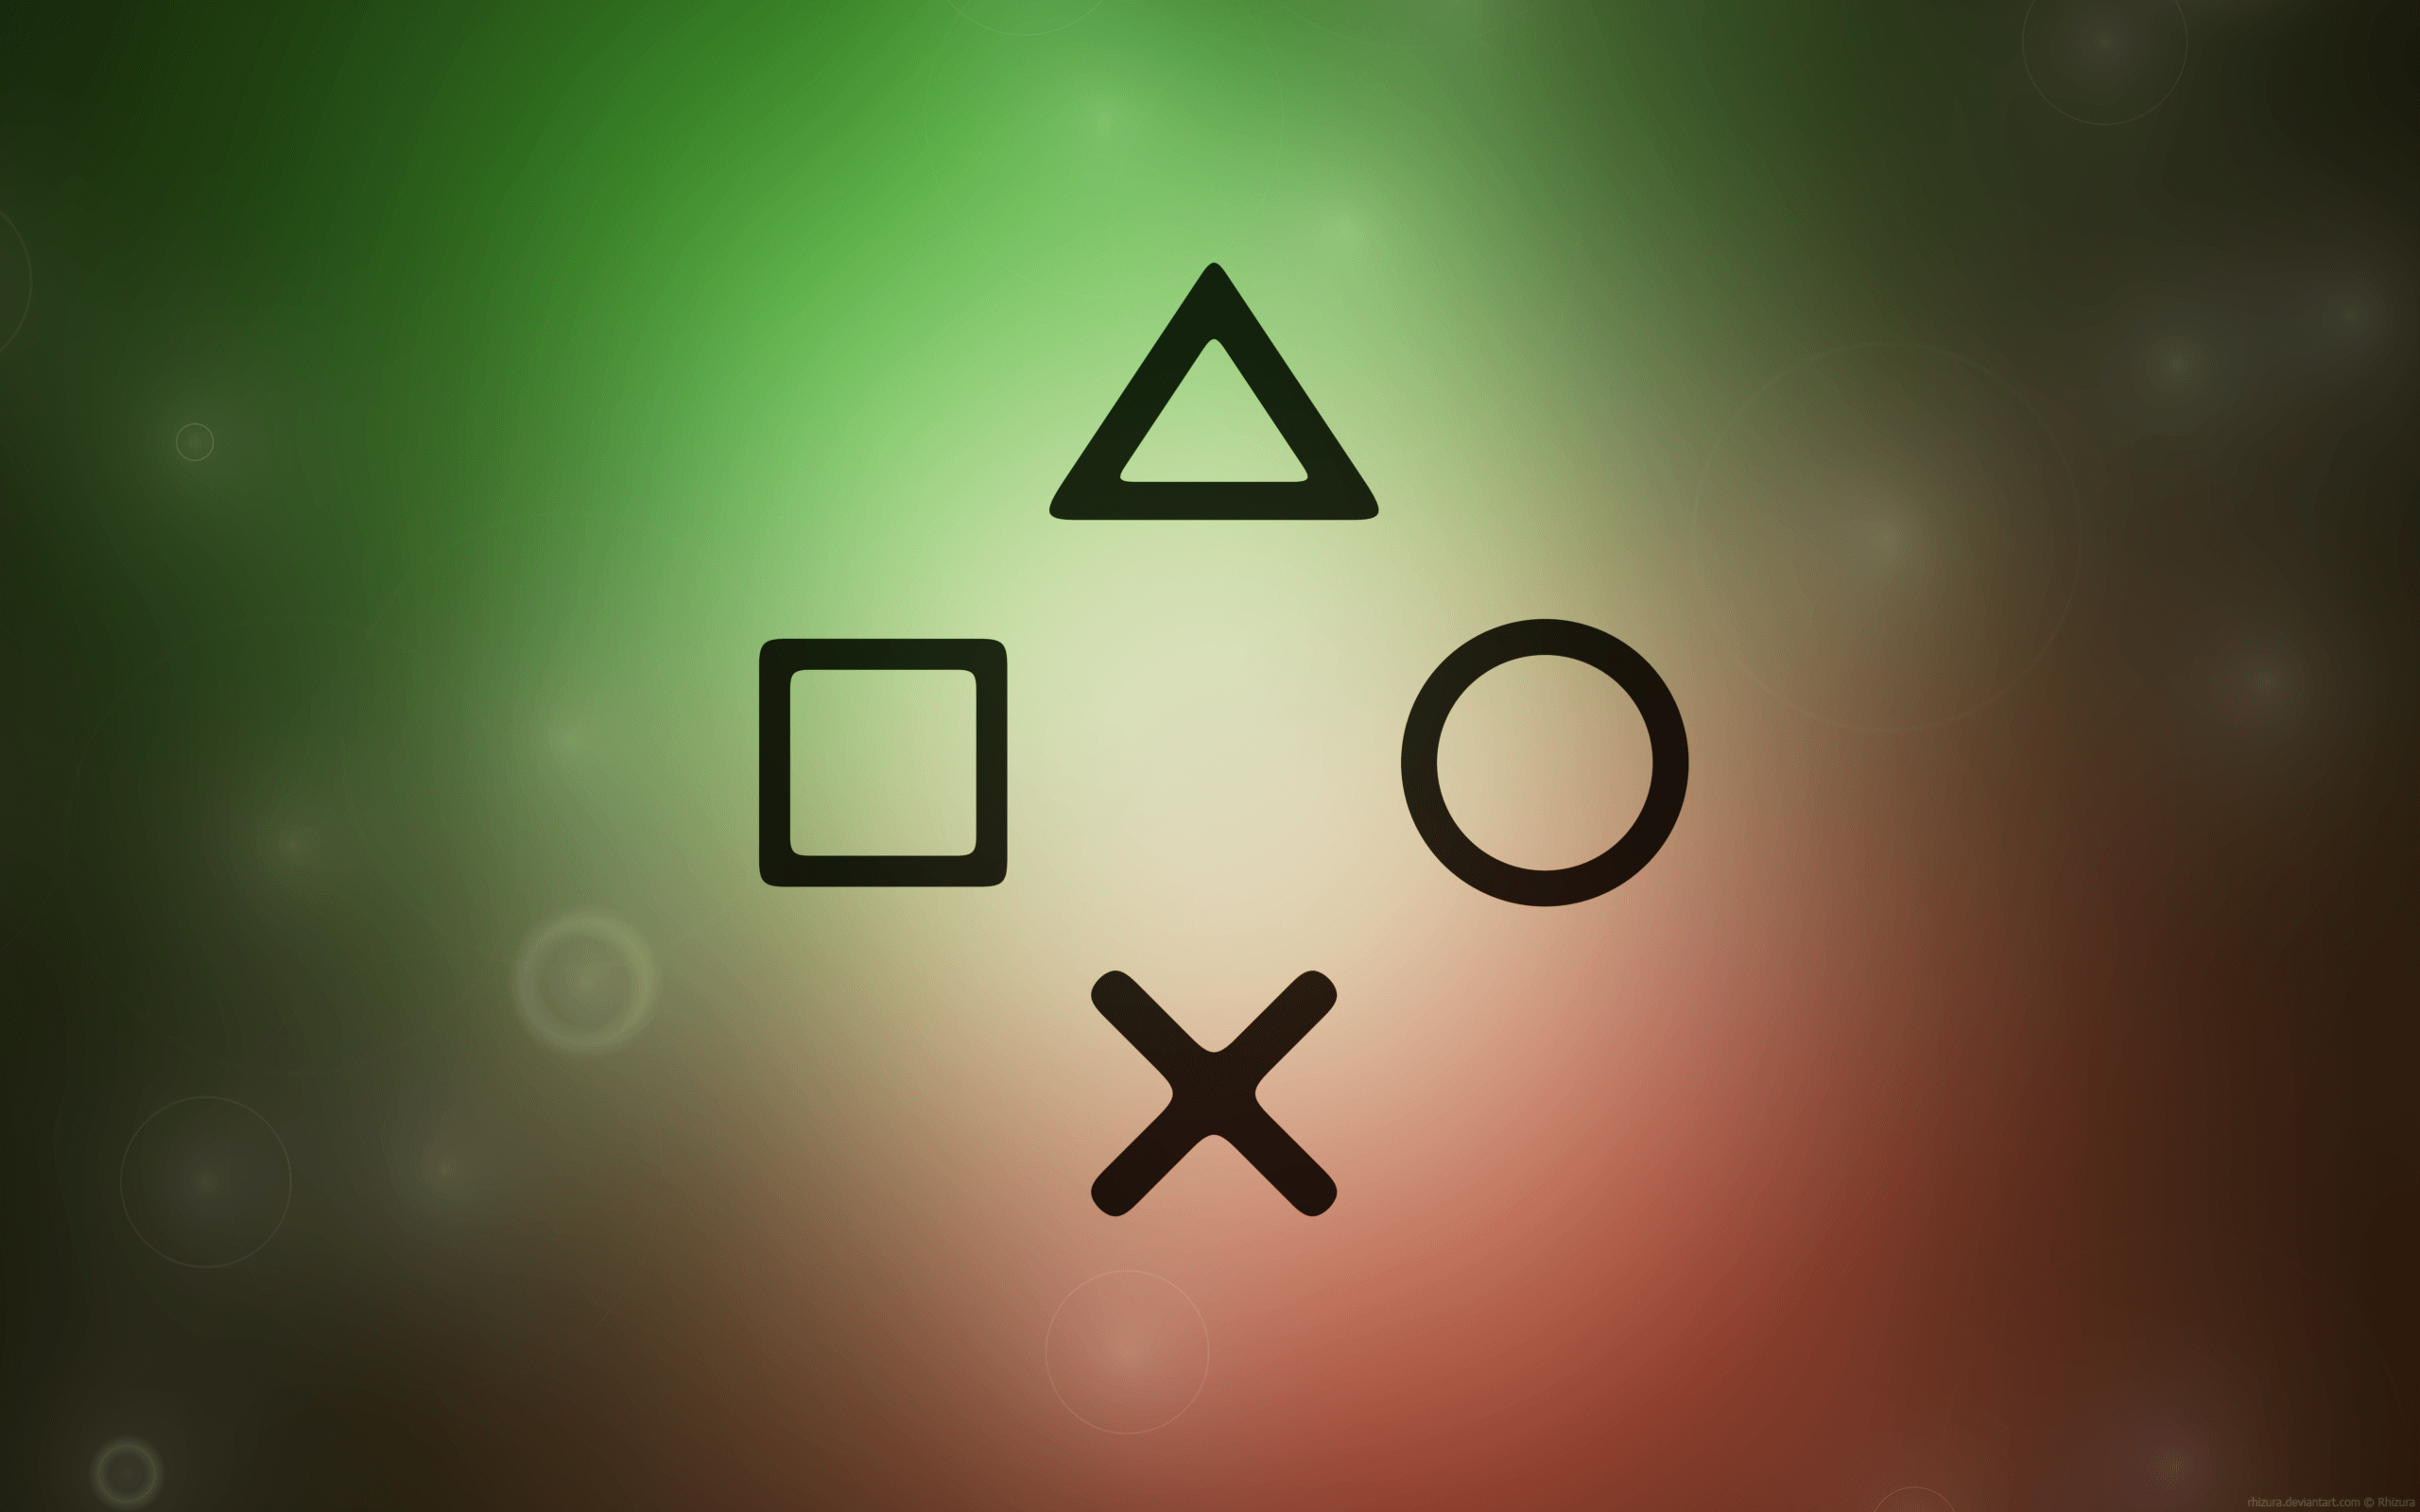 Neon PlayStation buttons Wallpapers